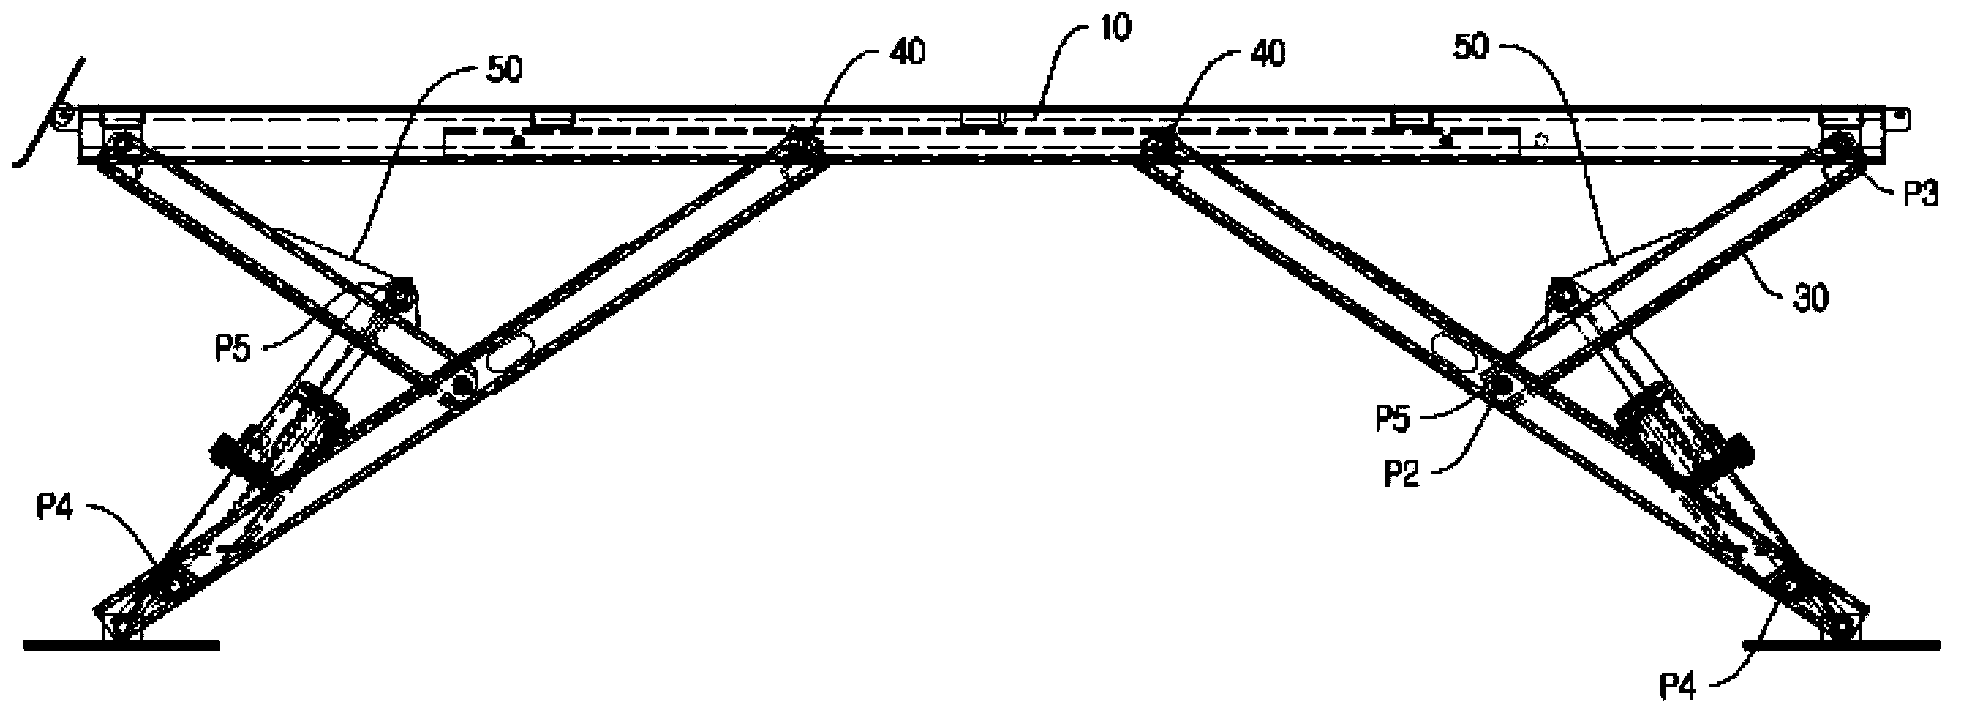 Semi scissor-type lift for vehicles having an improved structure